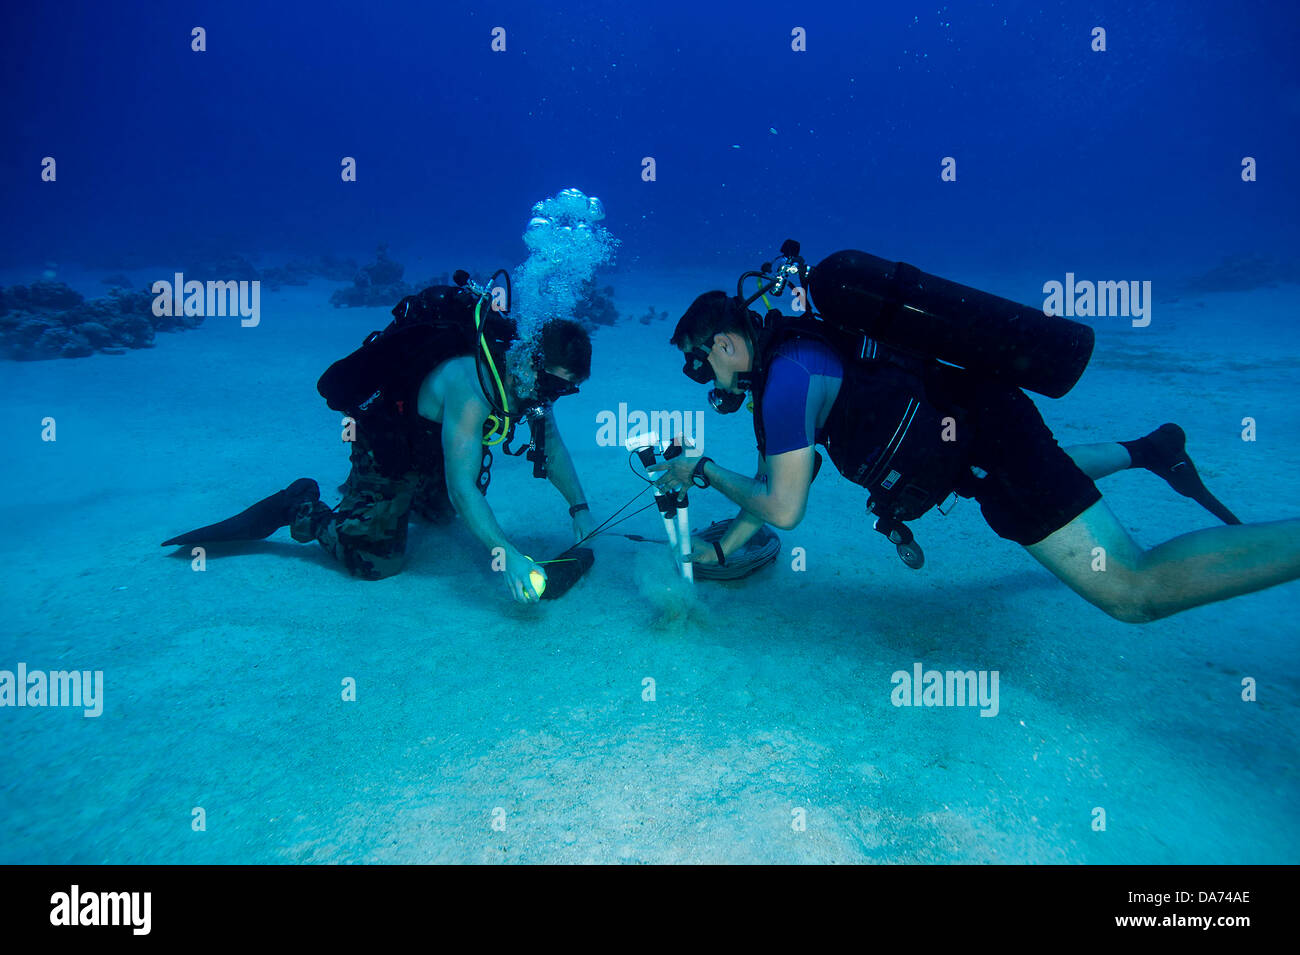 US Navy Explosive Ordnance Disposal diver and a sailor from the Royal Jordanian Navy place a charge for an underwater detonation during Exercise Eager Lion June 13, 2013 in Aqaba, Jordan. Stock Photo